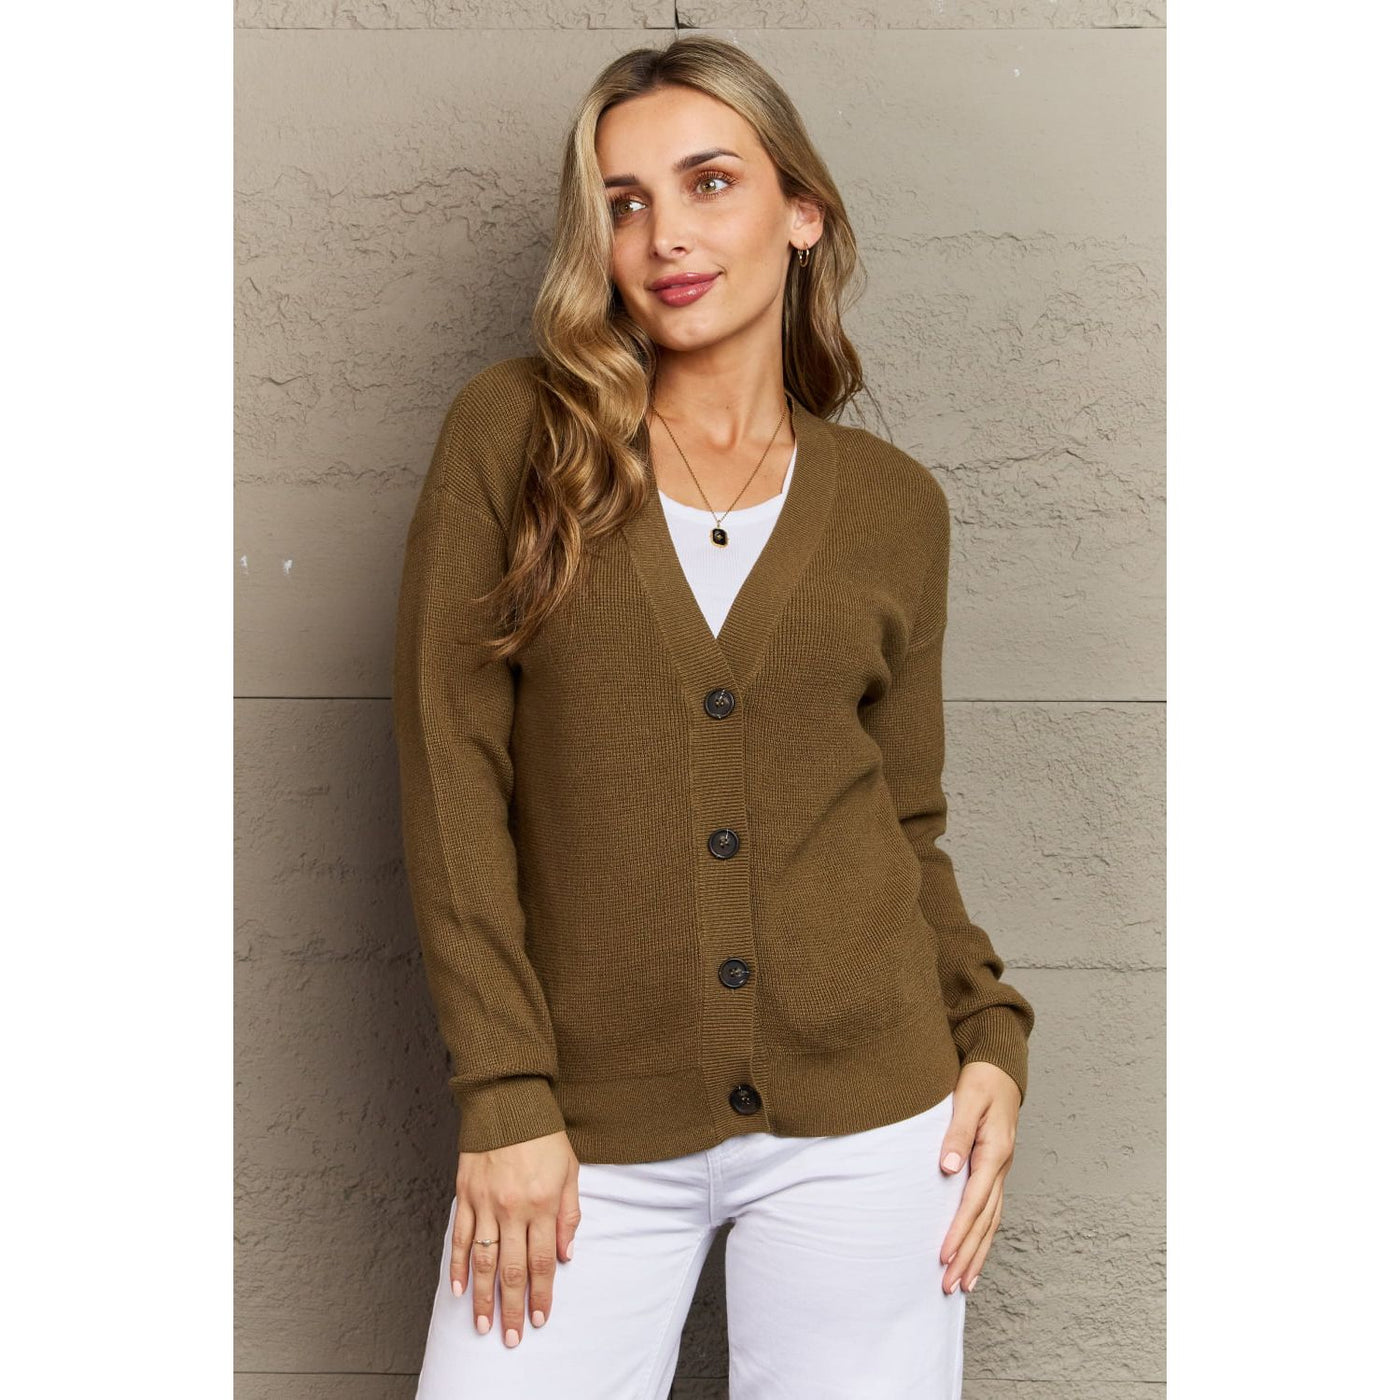 Rosa Button Down Cardigan in Olive